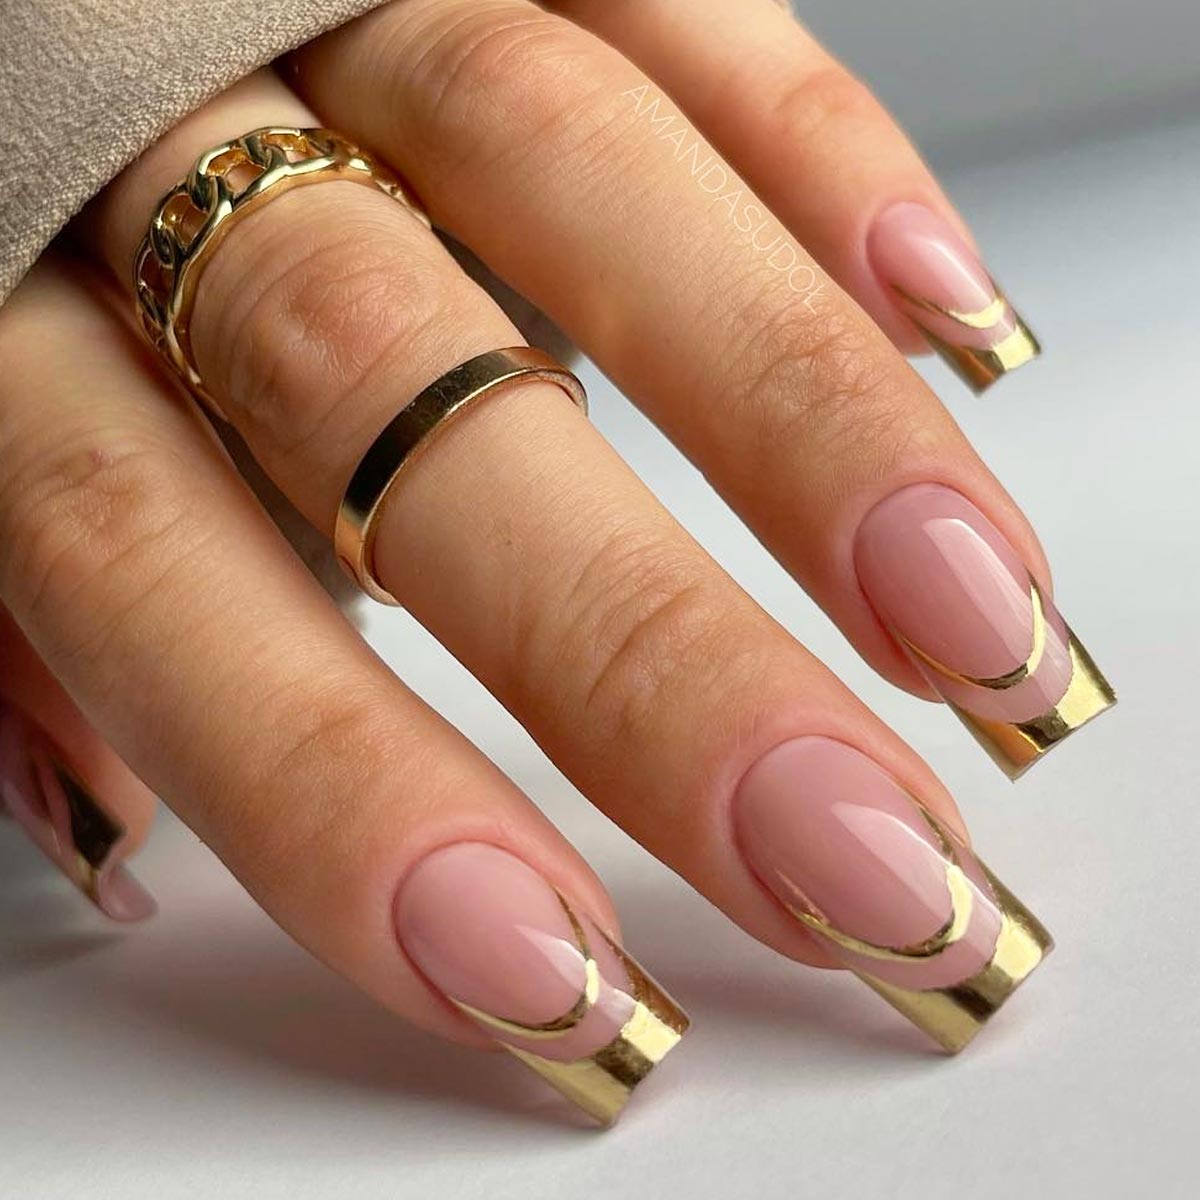 French manicure gold